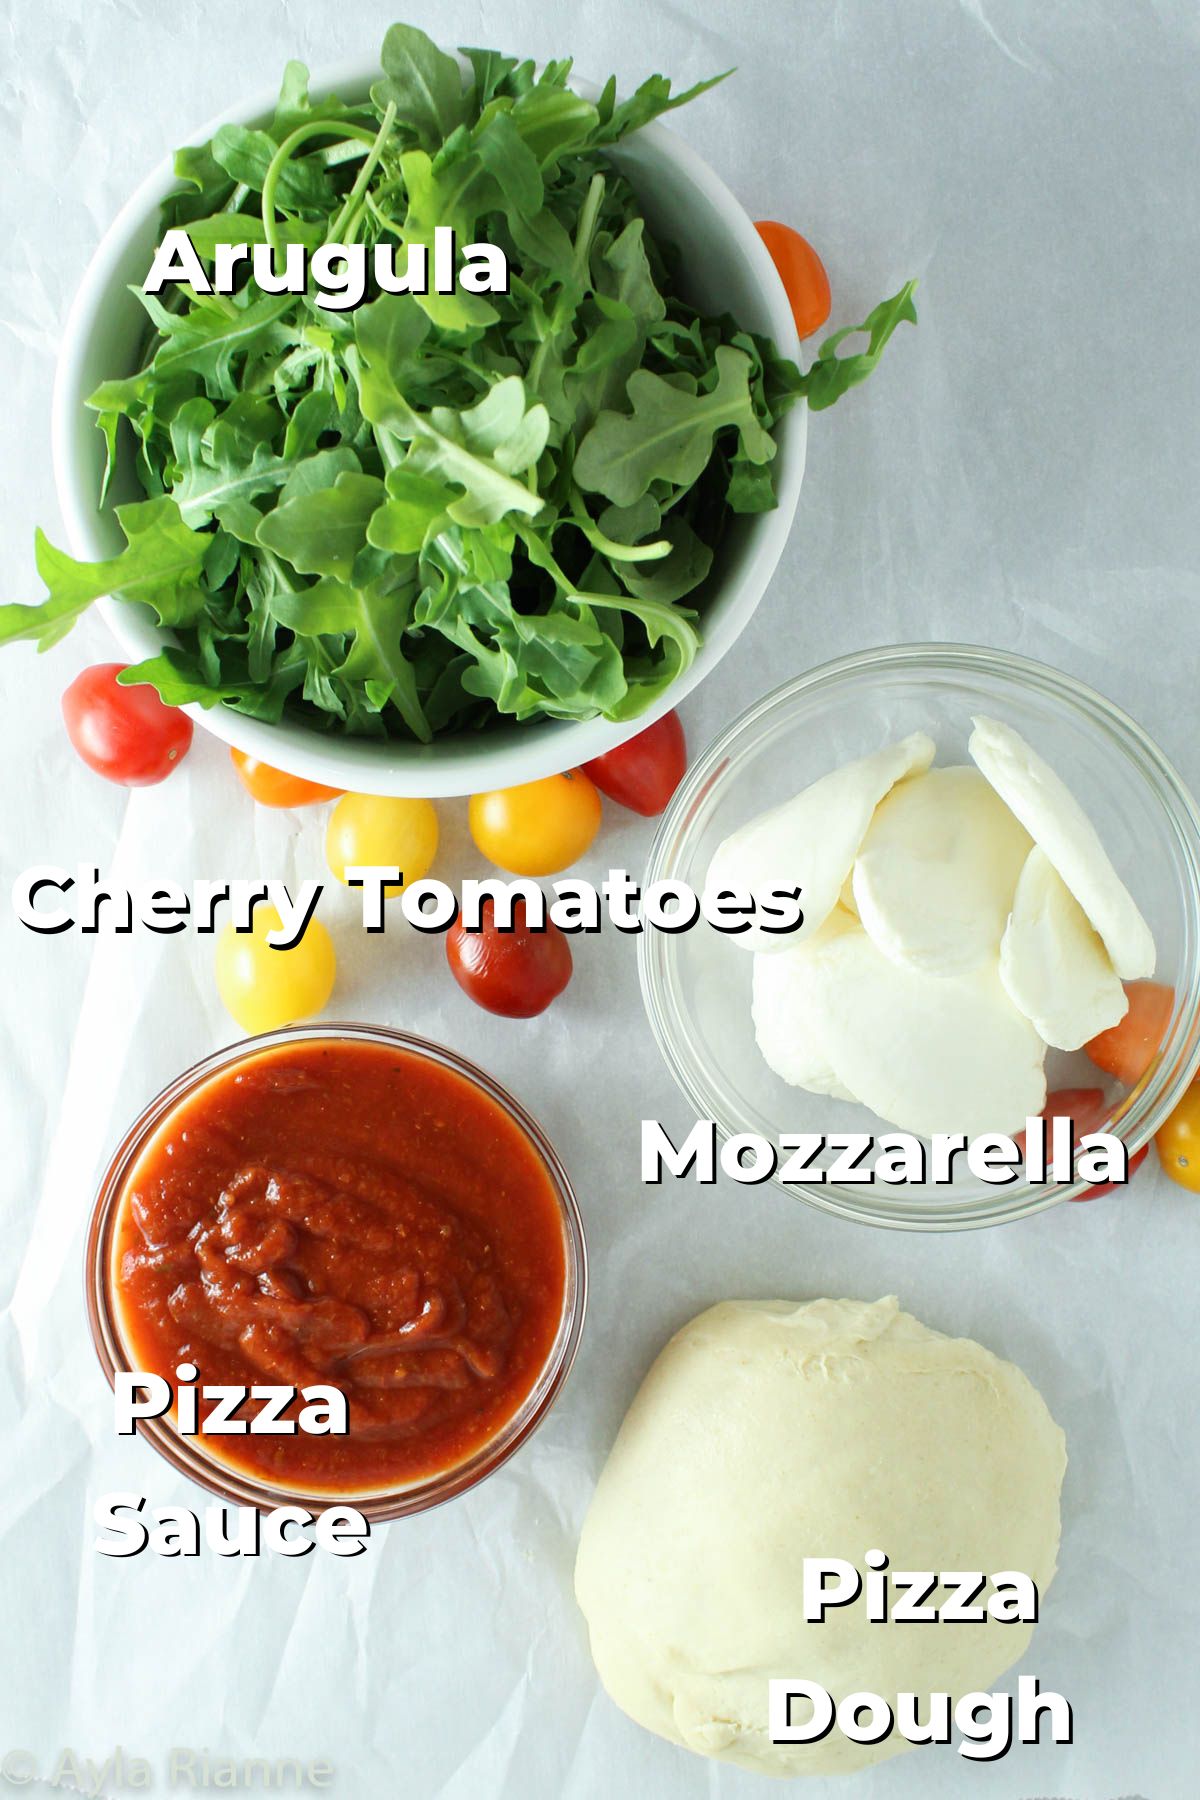 ingredients for Arugula pizza